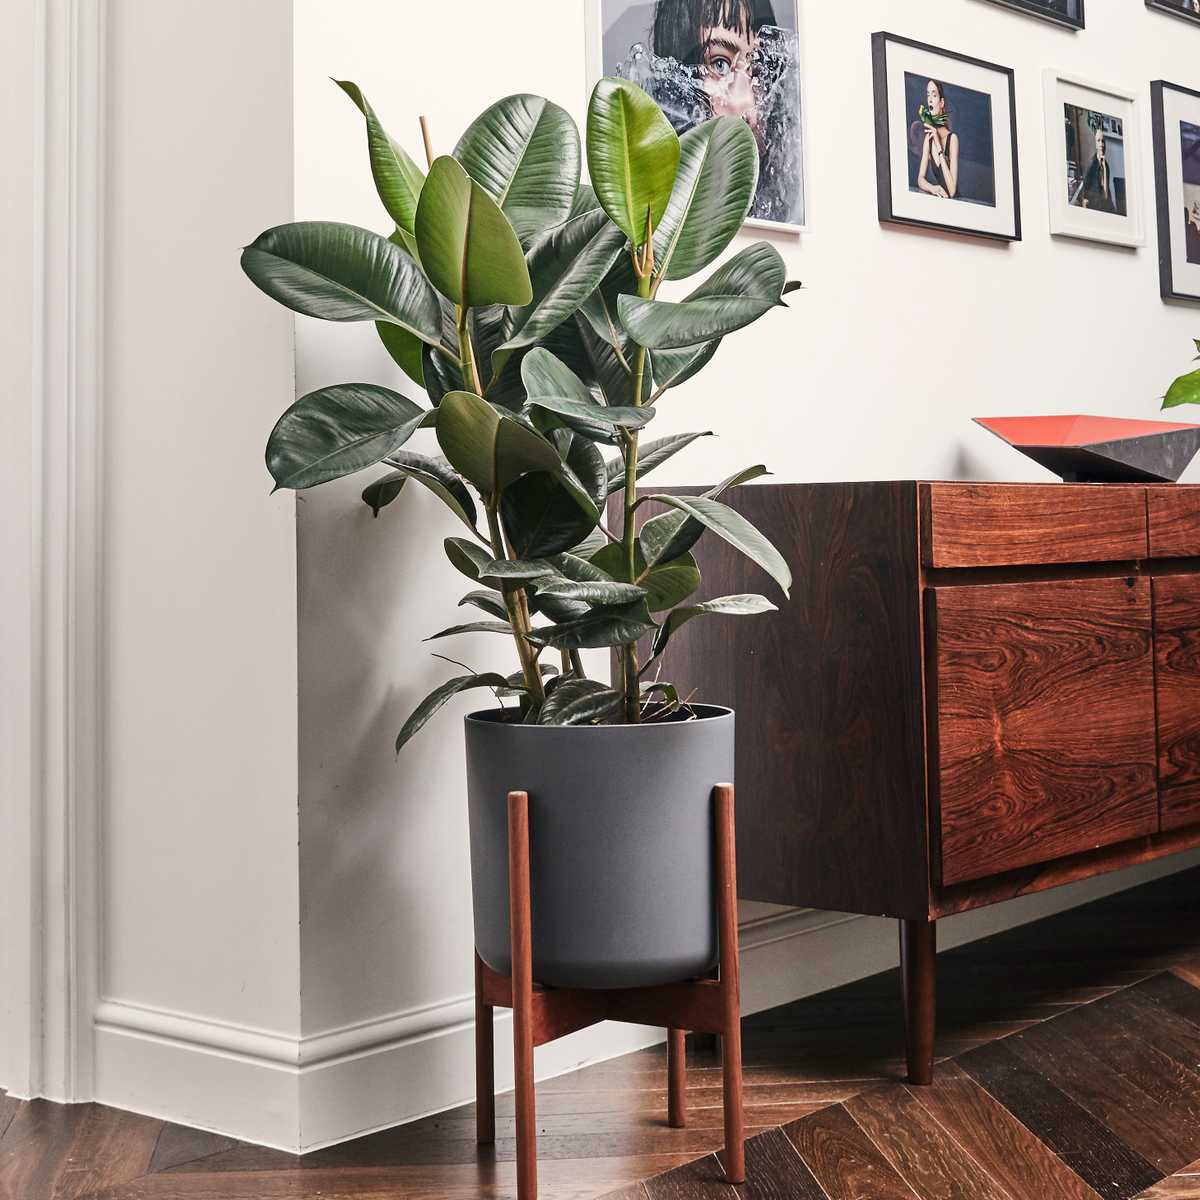 The Rubber Plant can look great in most rooms of the house